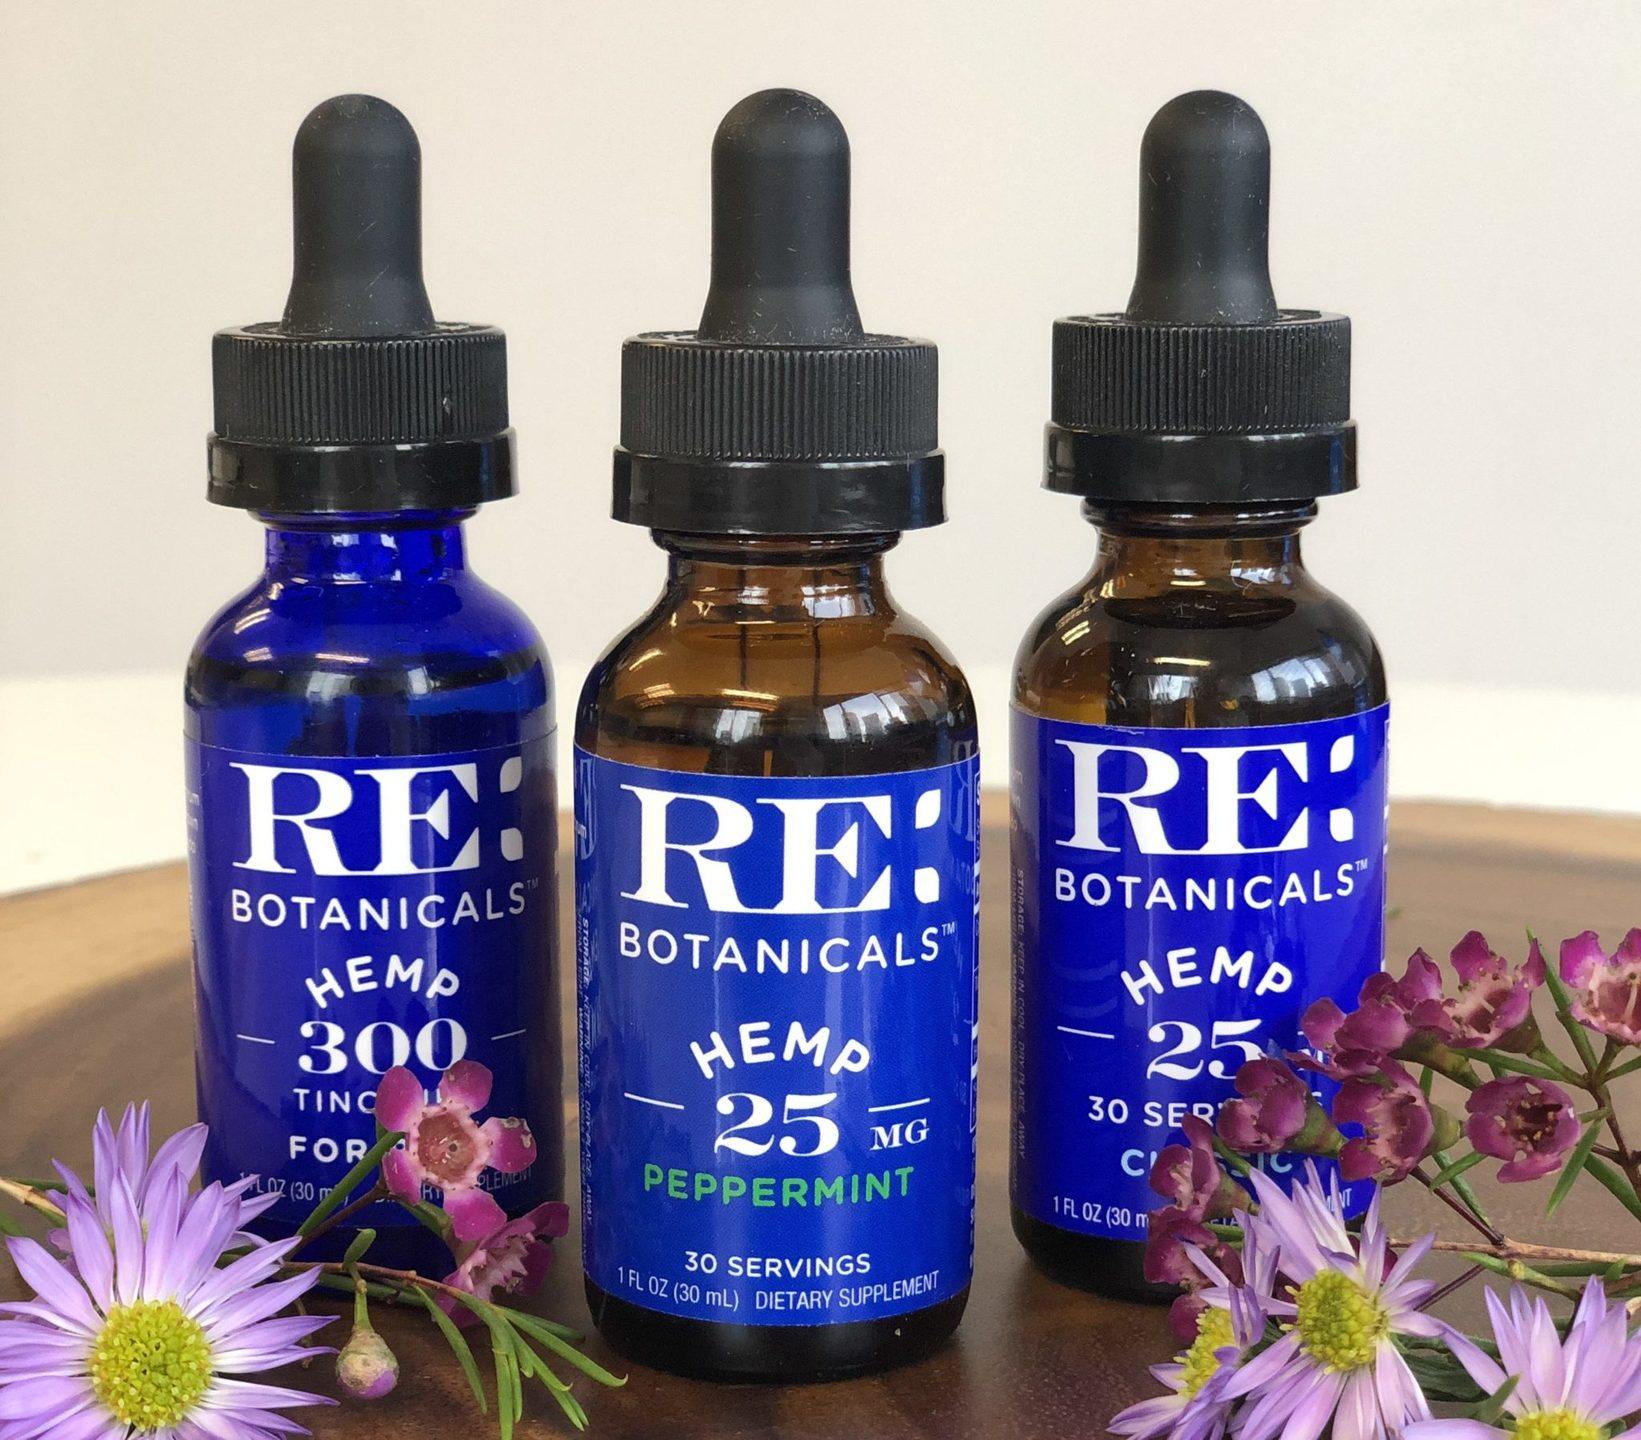 RE Botanicals Hemp Tincture tastes great, and left our reviewers feeling relaxed. Photo: RE Botanicals Hemp Tincture bottles on top of a wooden surface decorated with flowers.